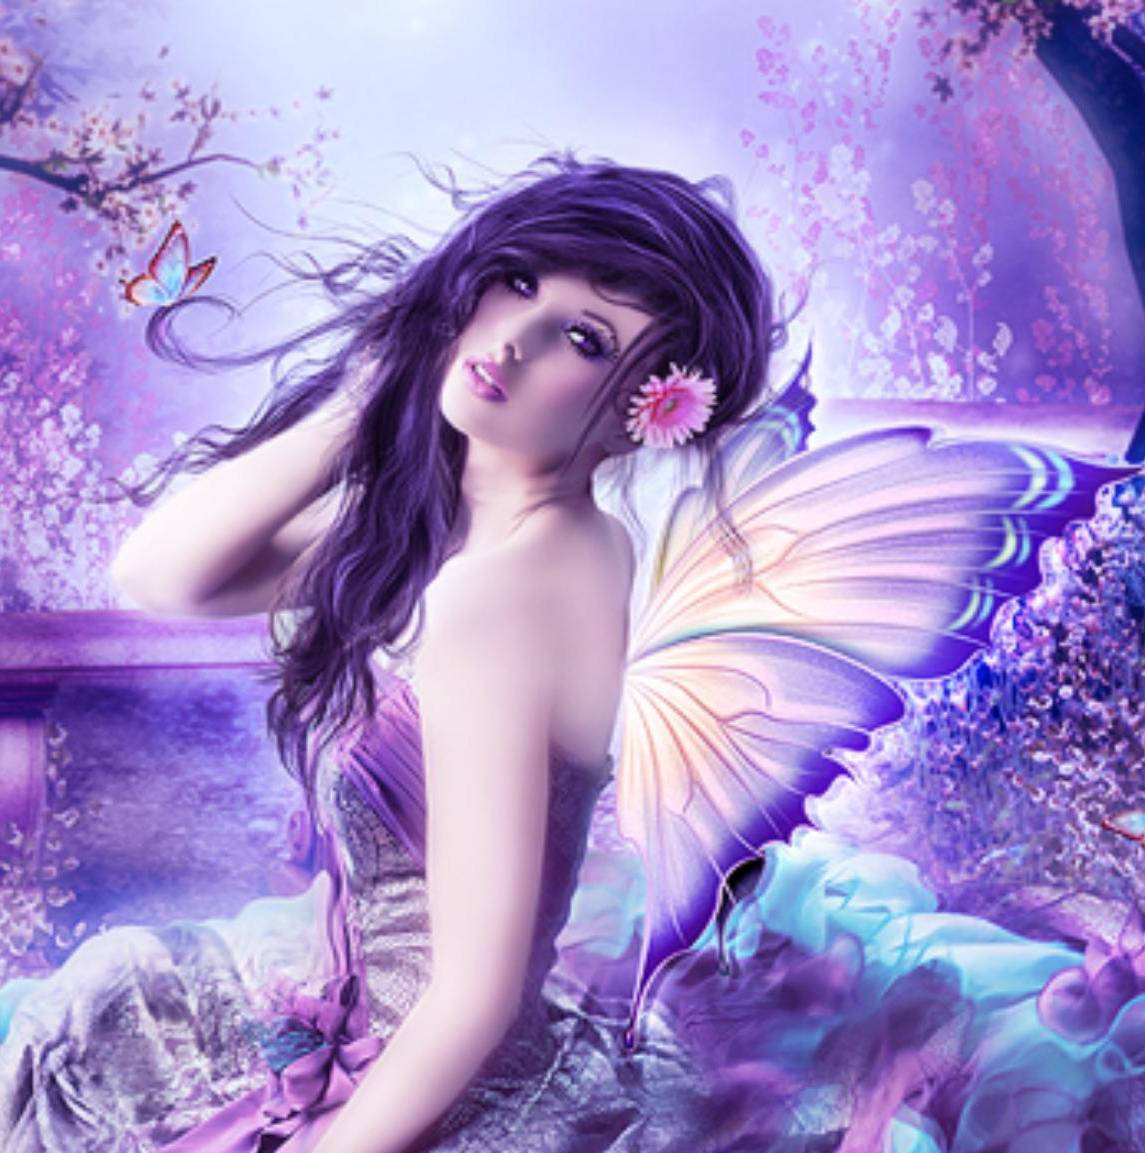 Seven Dark Fairy Hd Wallpapers 2 Background, Picture Of Dark Fairies  Background Image And Wallpaper for Free Download